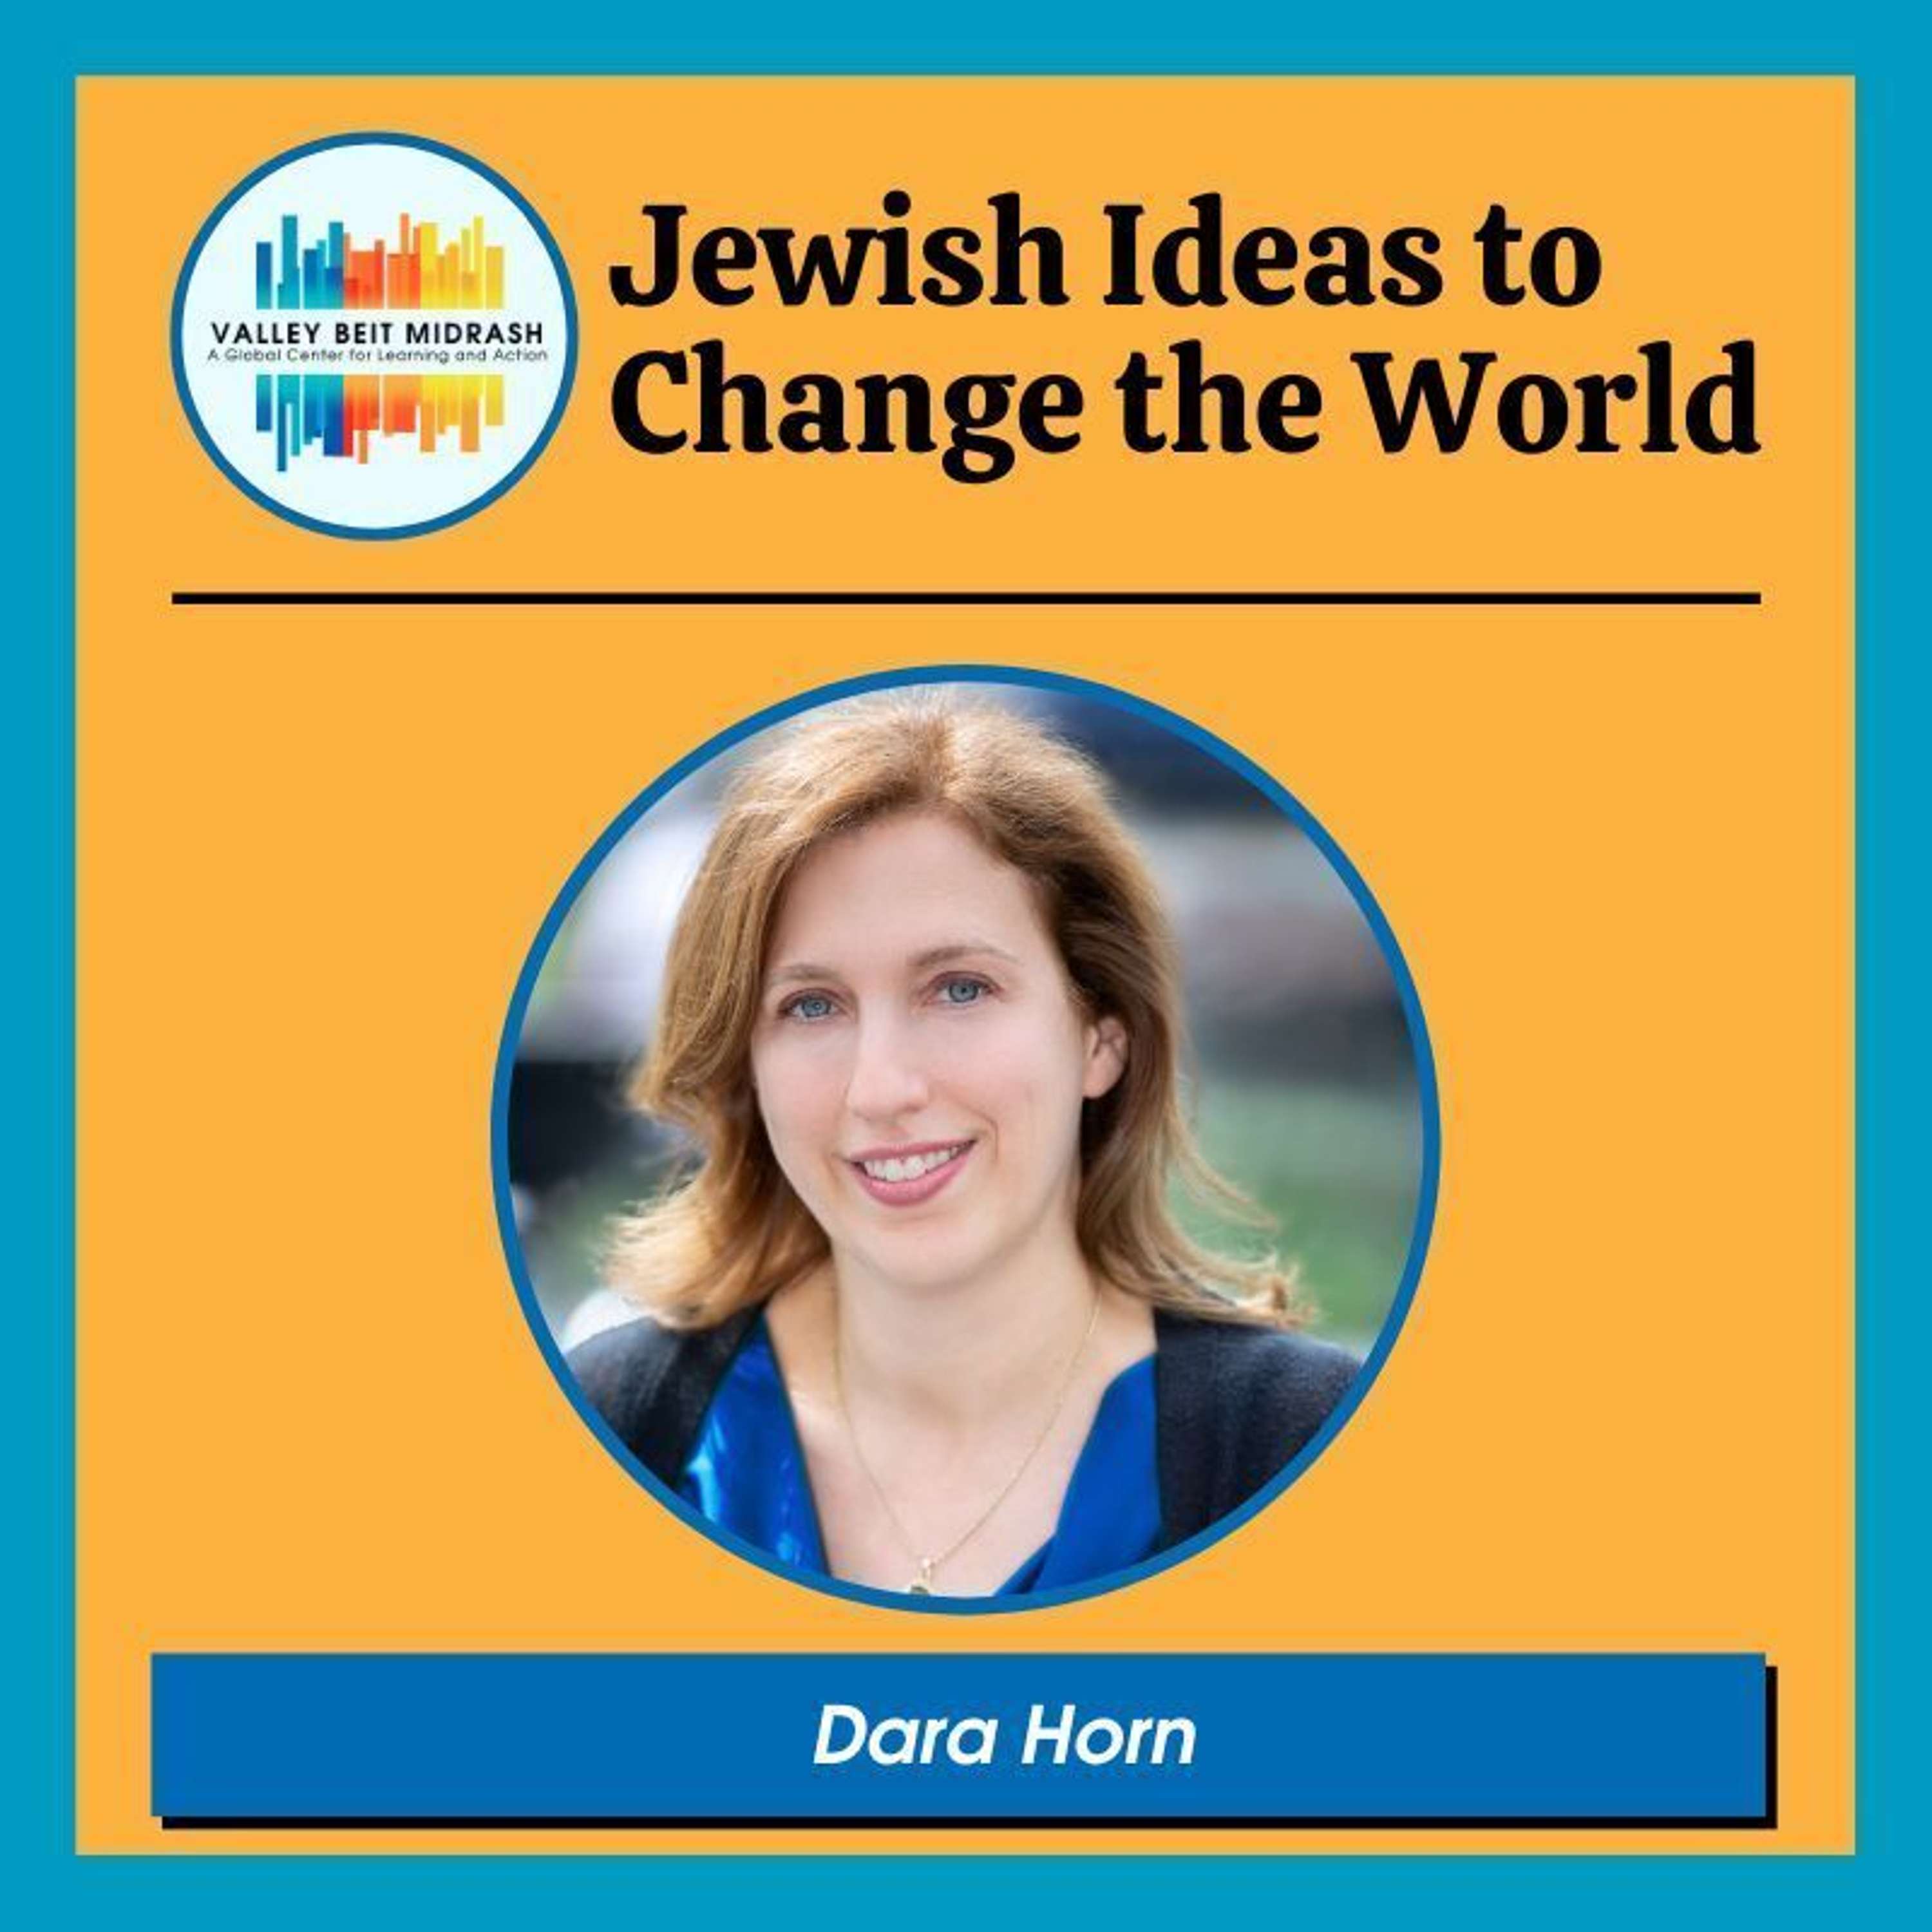 Jewish Spies in the Civil War and Contemporary Polarization: An Interview With Dara Horn